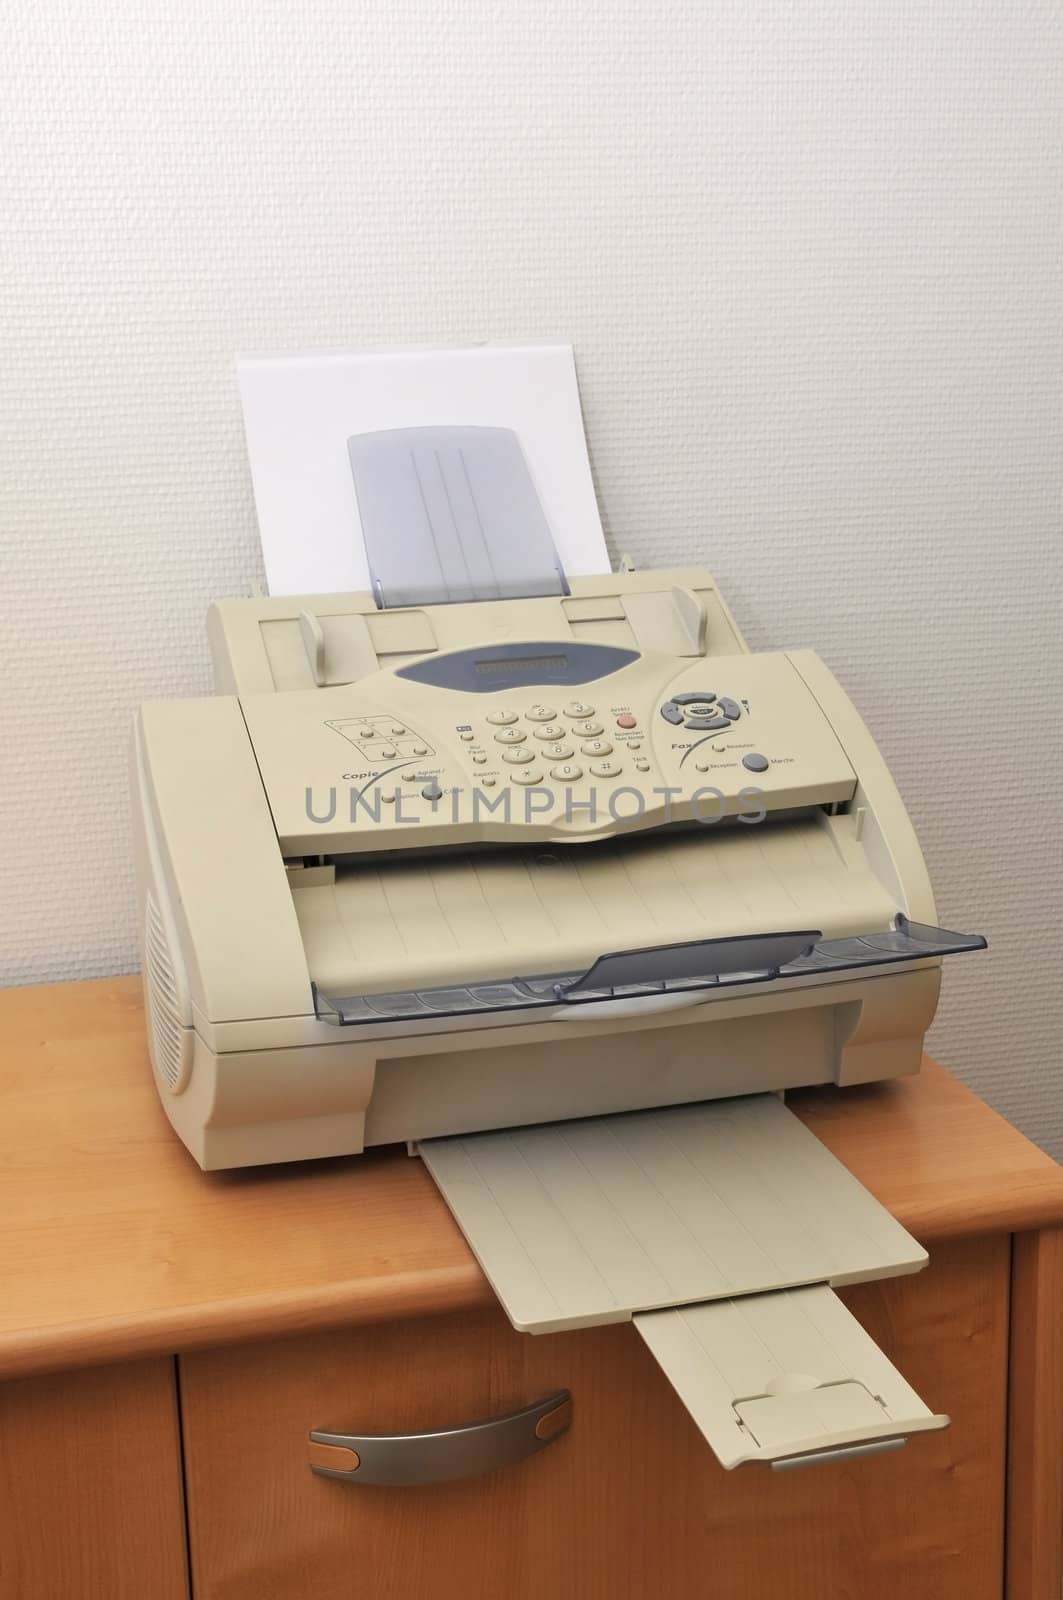 Old fax in office on a furniture